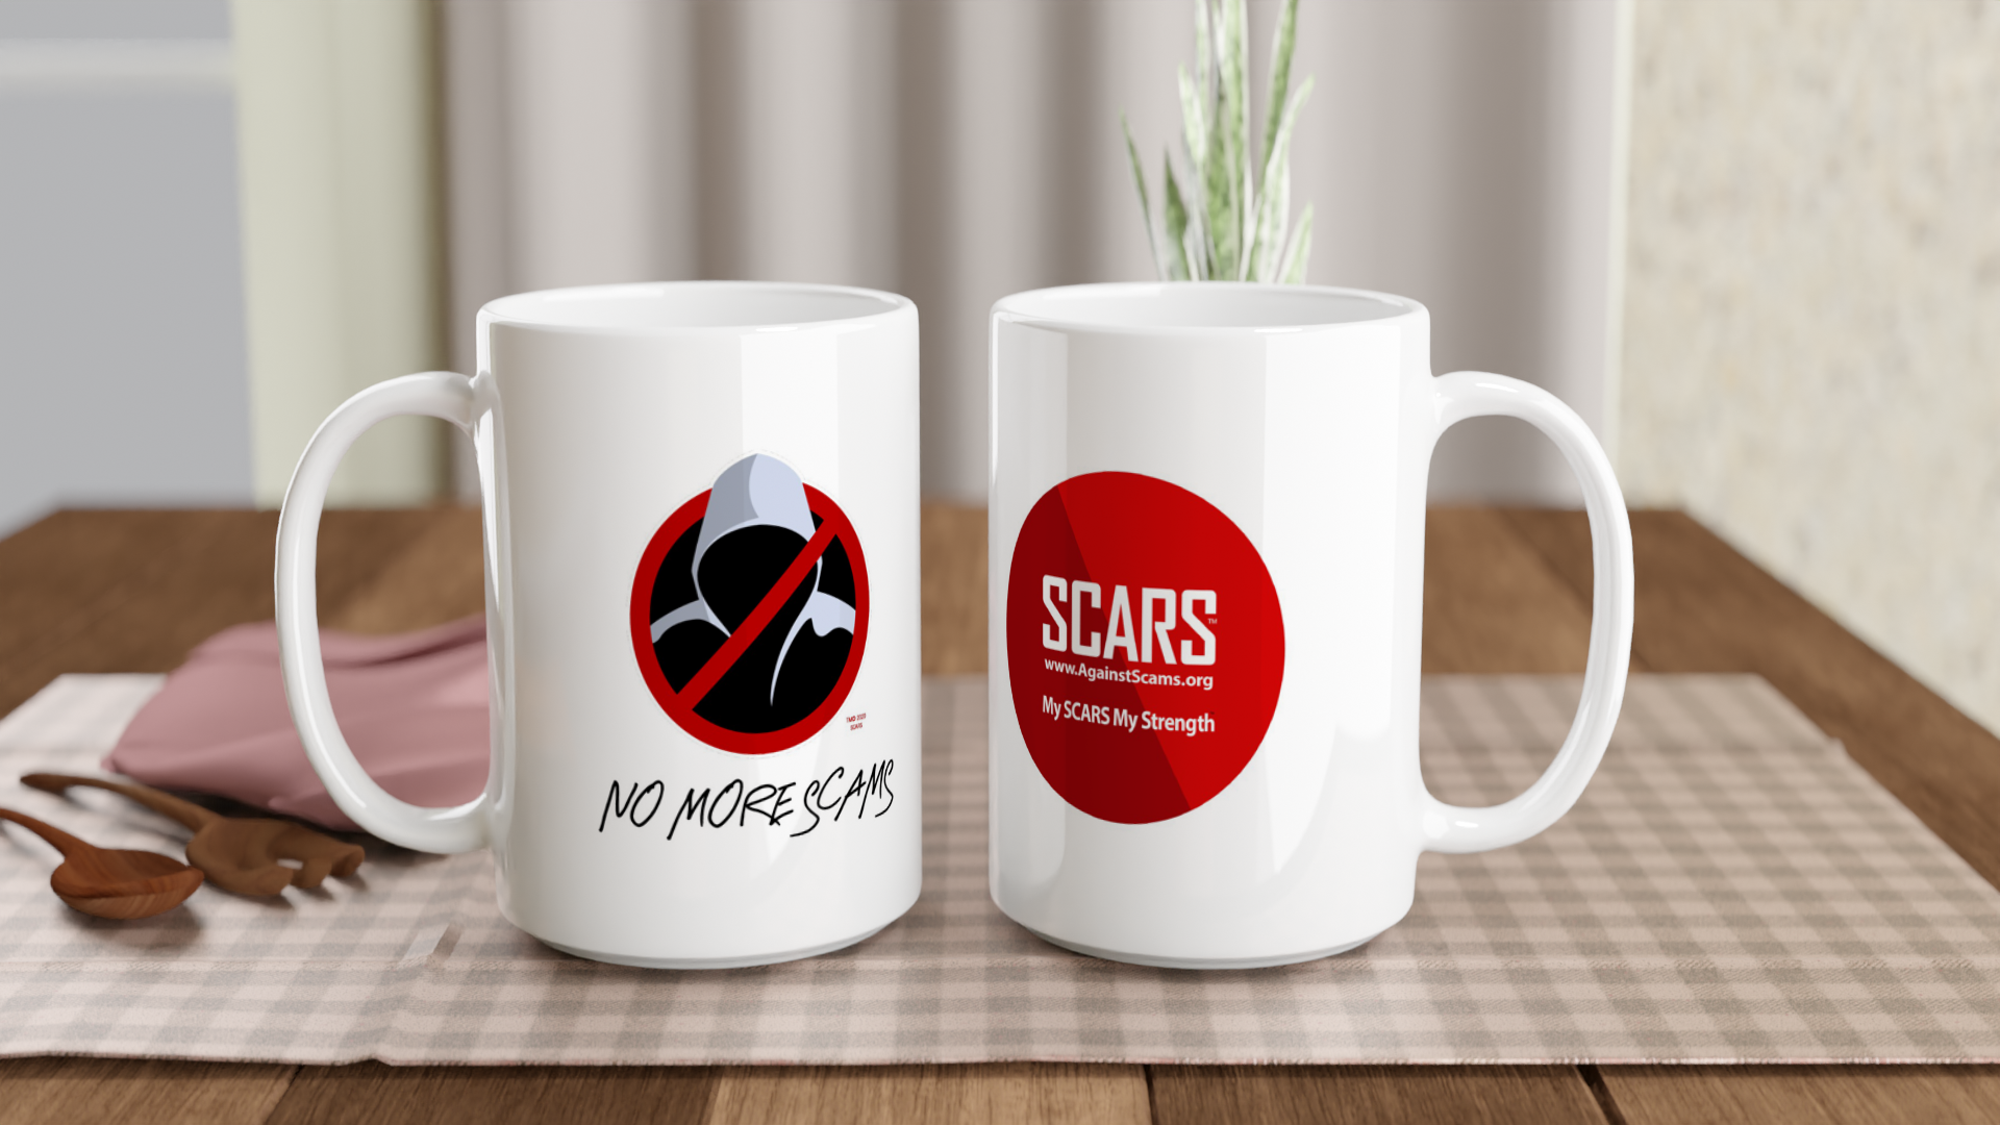 Visit the SCARS Company Store